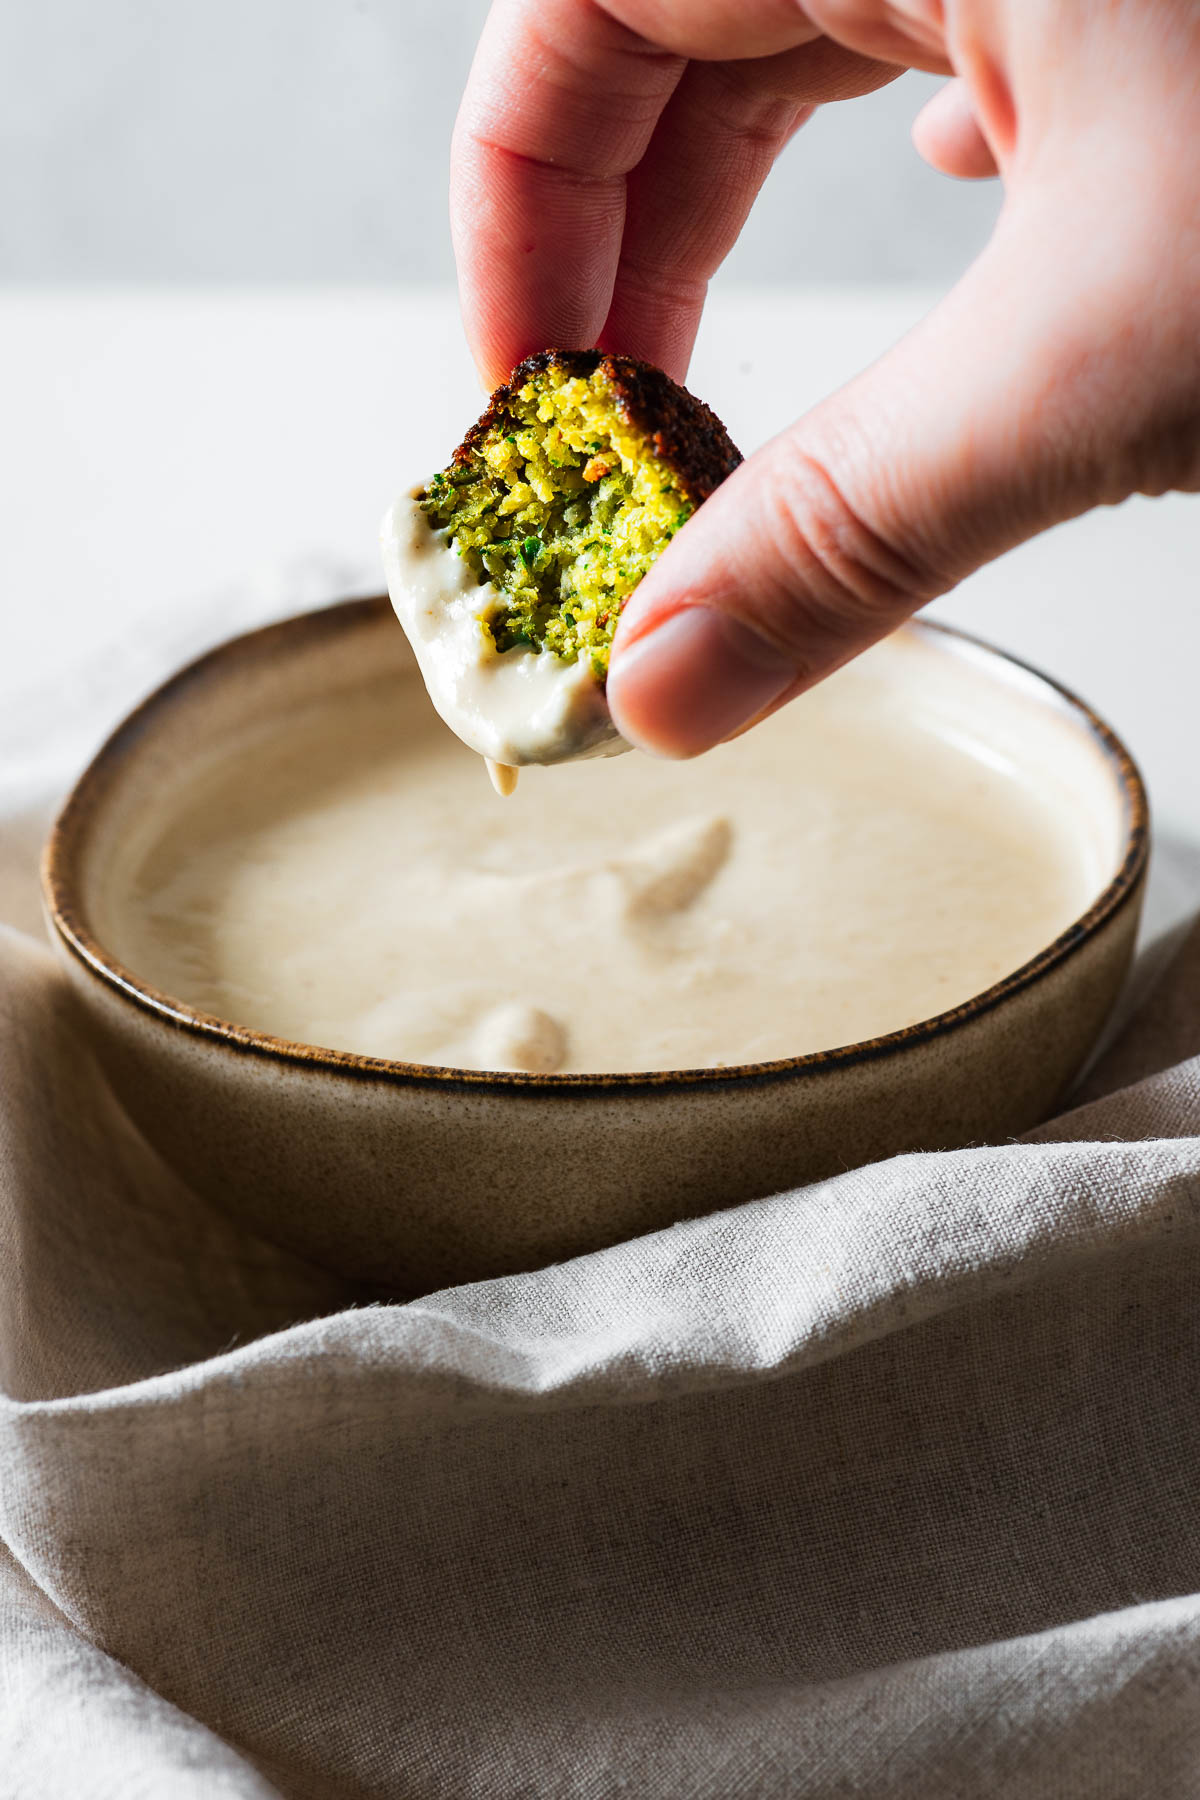 A close-up of a hand dipping a fresh Middle Eastern falafel into a small bowl of tahini sauce.